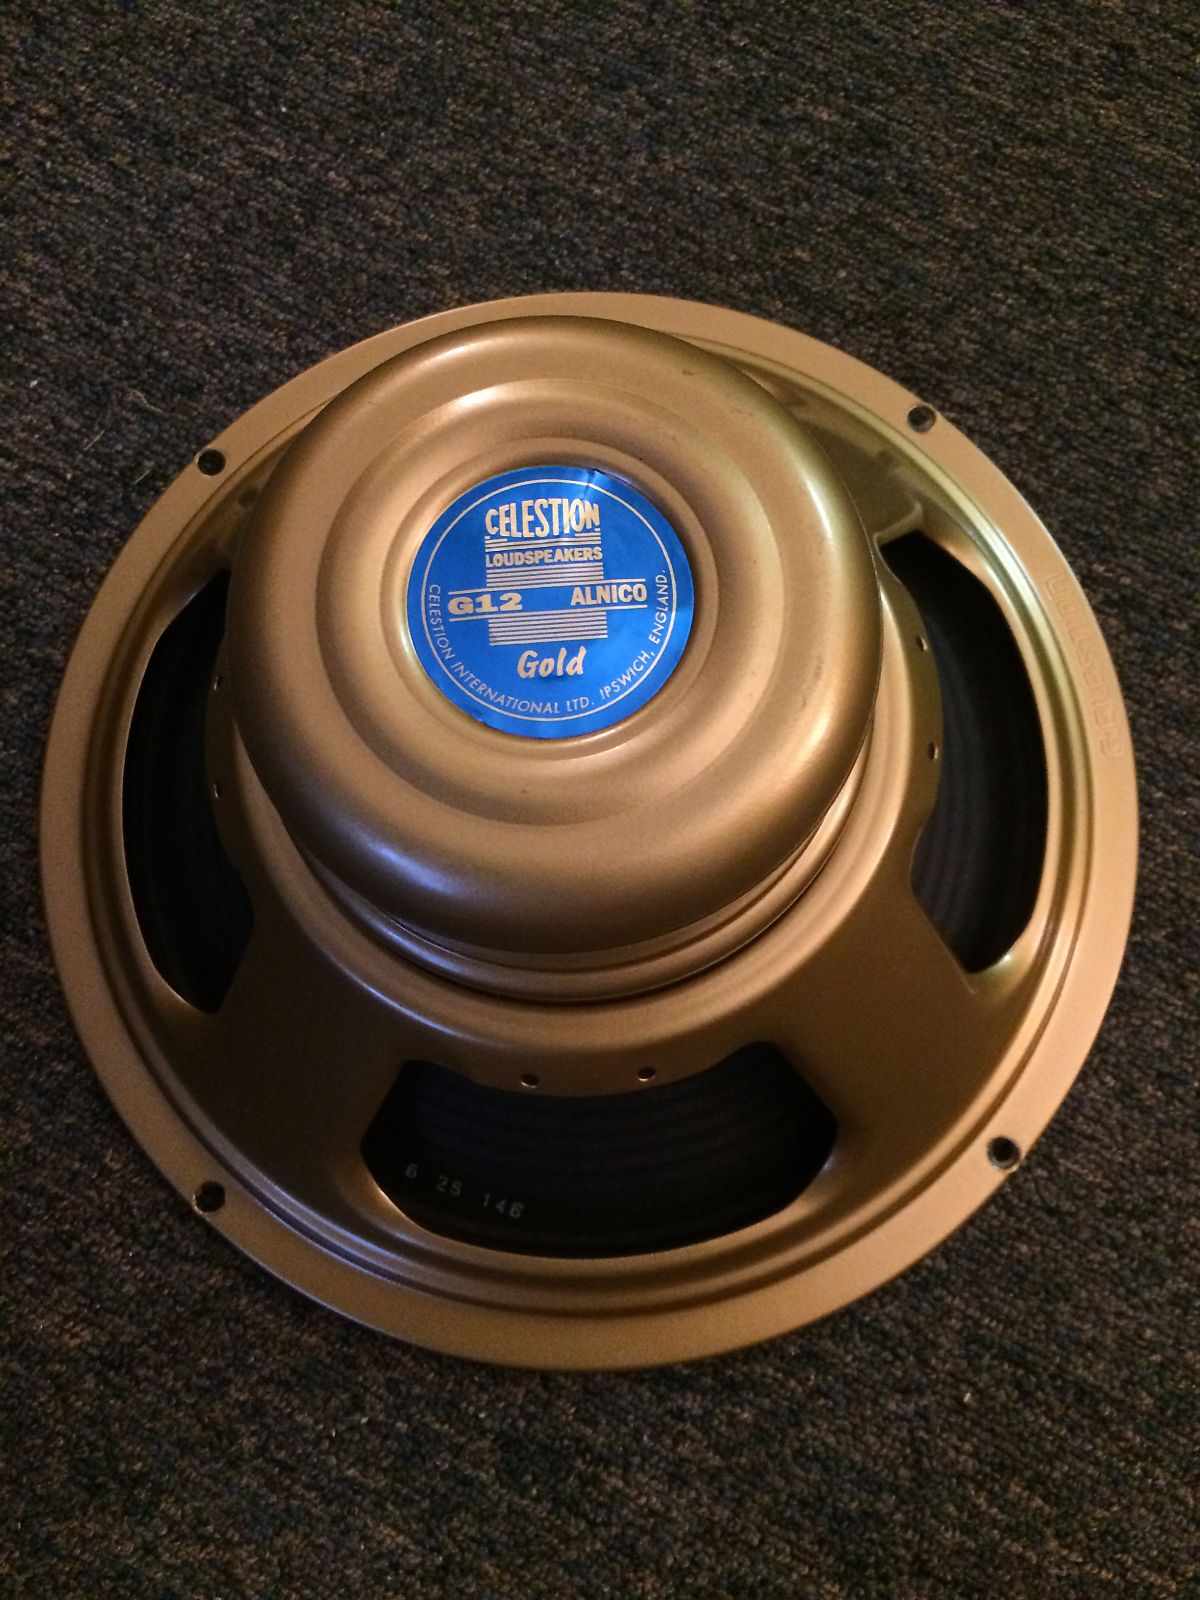 Celestion G12 Alnico Gold 12 50w 15 Ohm Replacement Speaker | Reverb